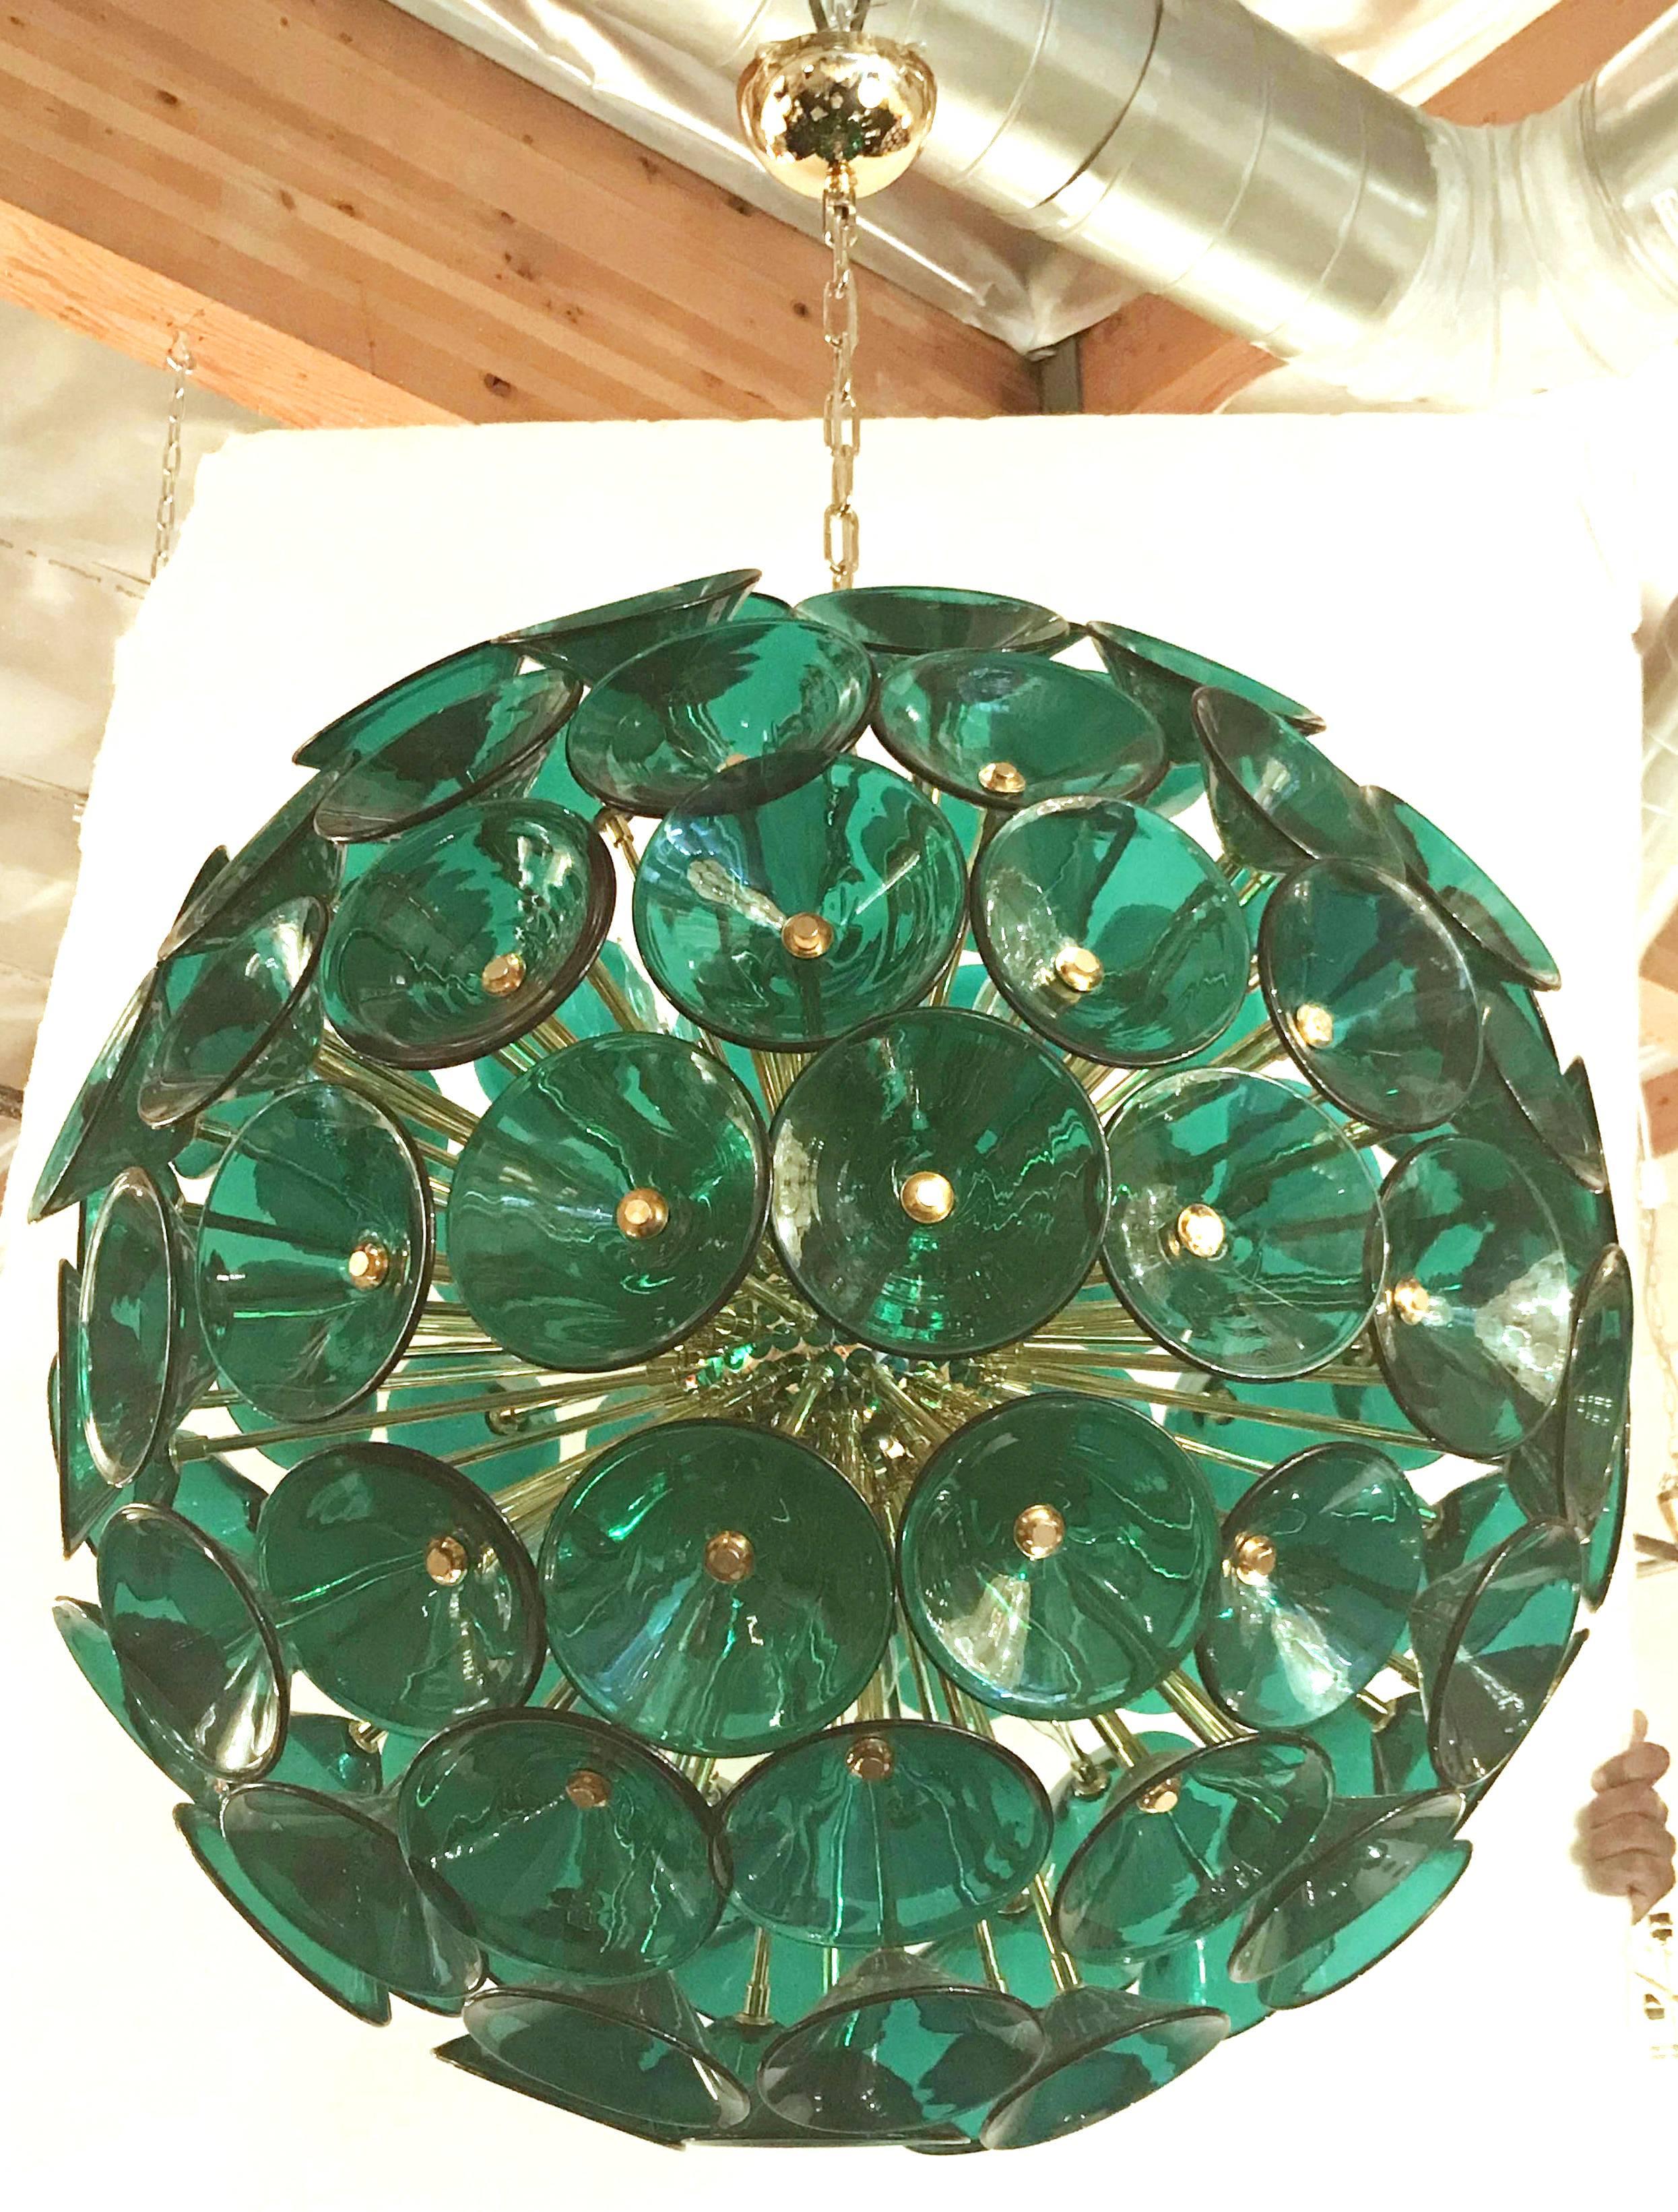 Sputnik chandelier with 105 vintage green Murano glass trumpets by Vistosi on new metal frame by Fabio Ltd. available in chrome or 24k gold metal finish.
12 lights / E12 type / max 40W each
Diameter: 29 inches / Height 29 inches
1 in stock in Palm